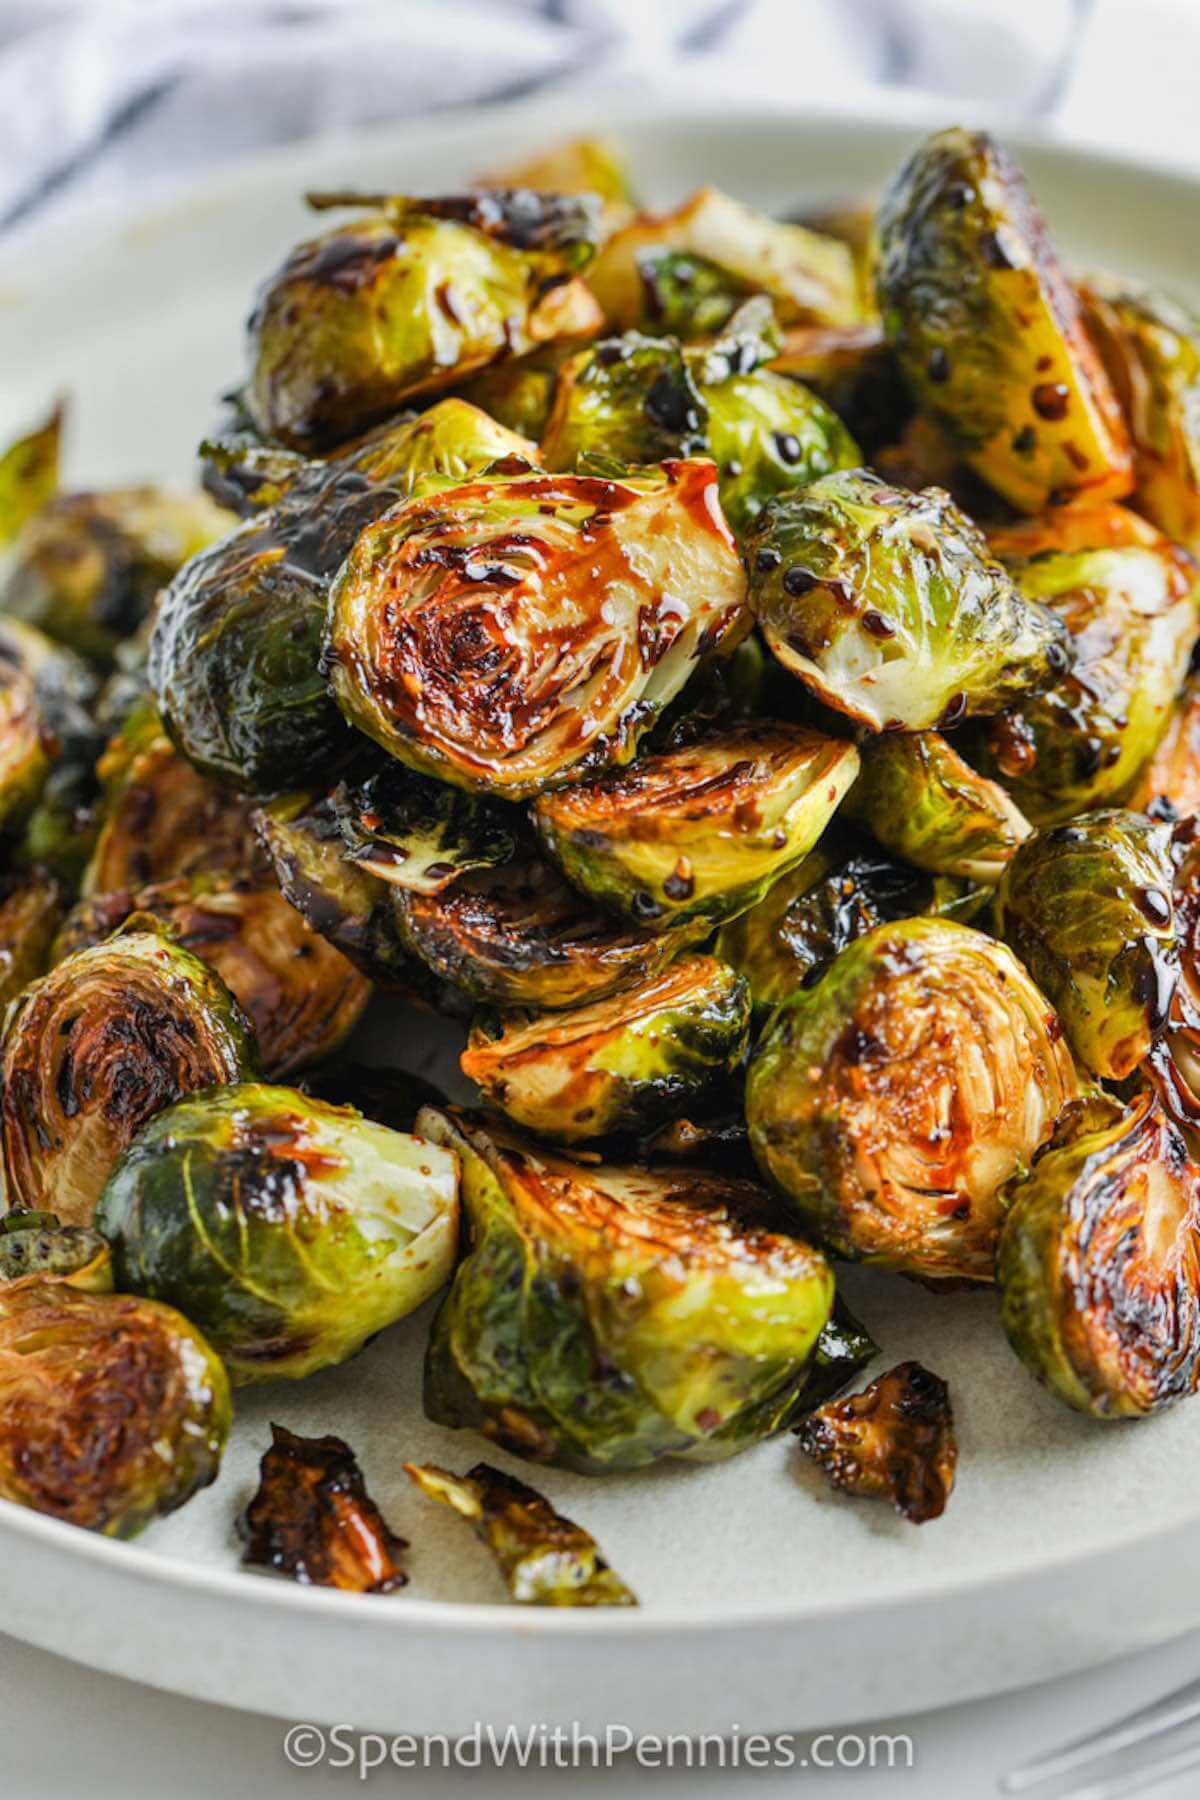 Brussel sprouts with a caramelized layer on a white plate.  